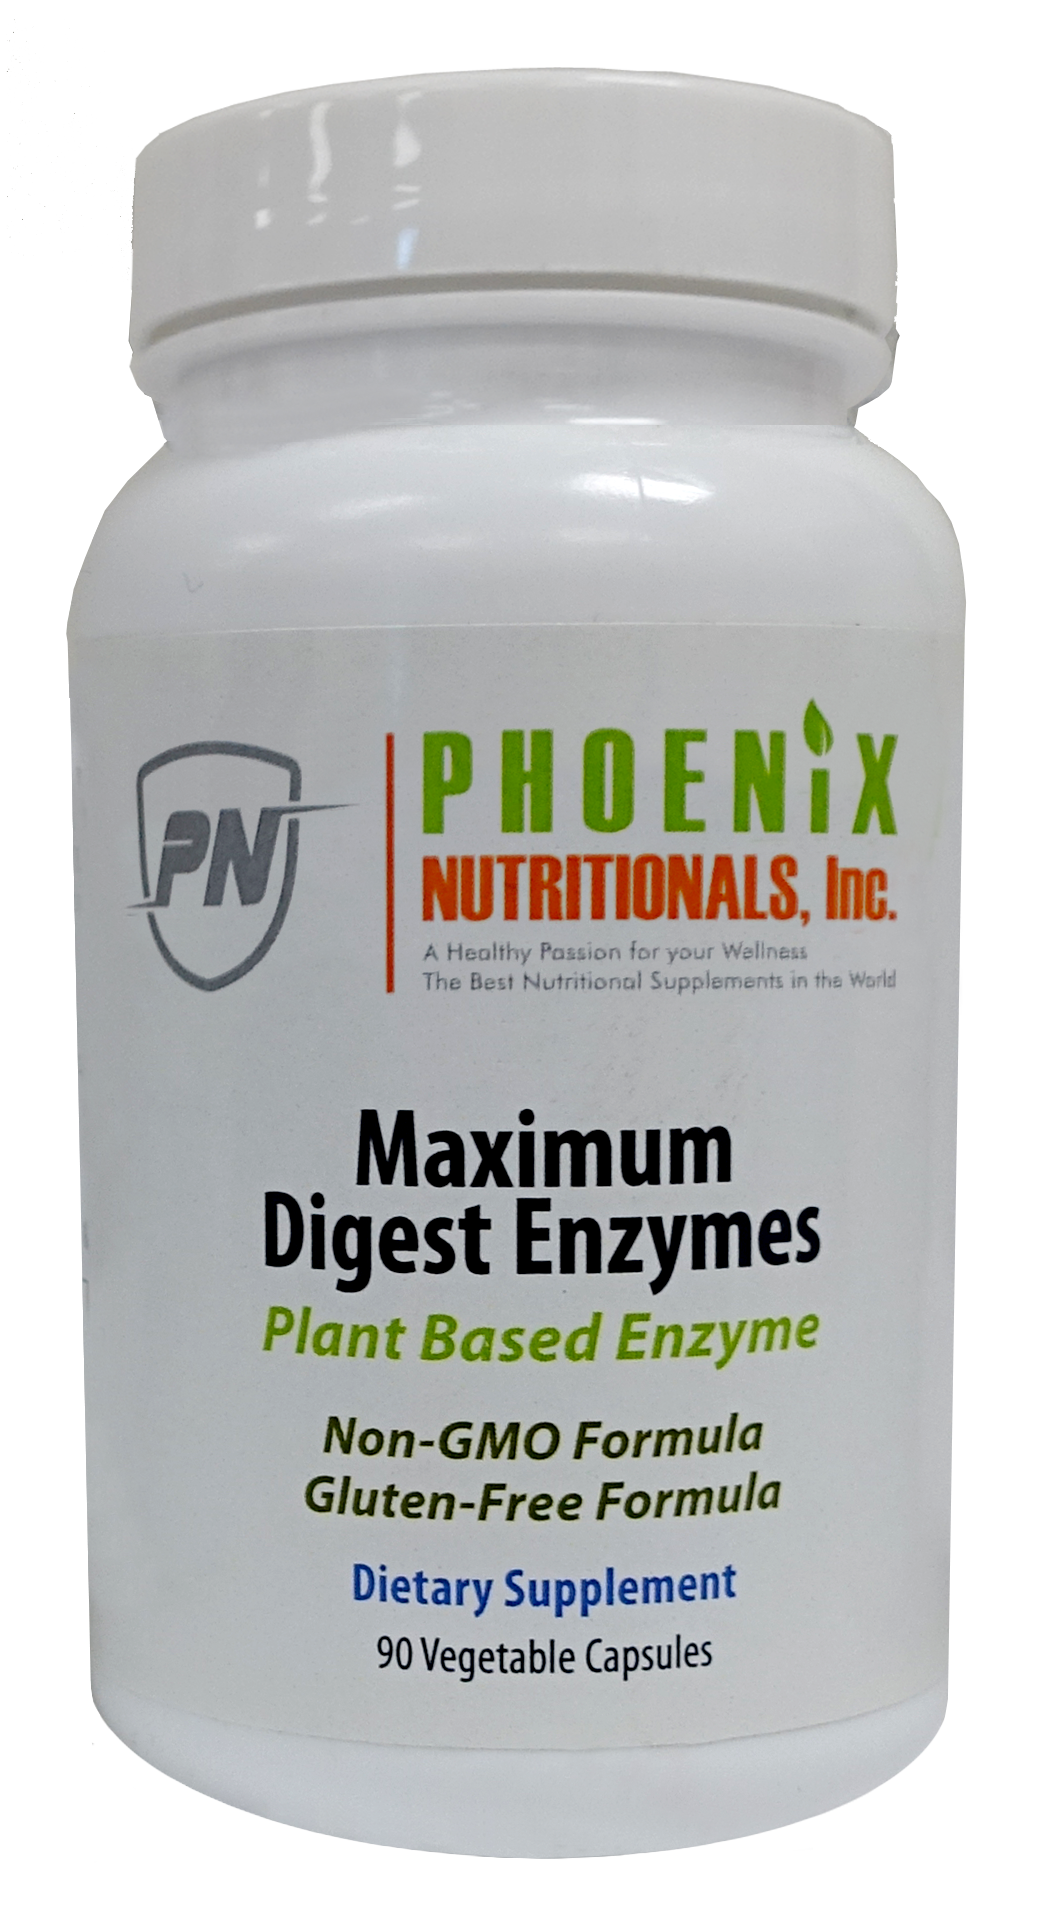 Plant enzymes. Max Enzyme. Enzymes - Phoenix. Digestive Enzymes. Sam nutritional products Selenium слон.